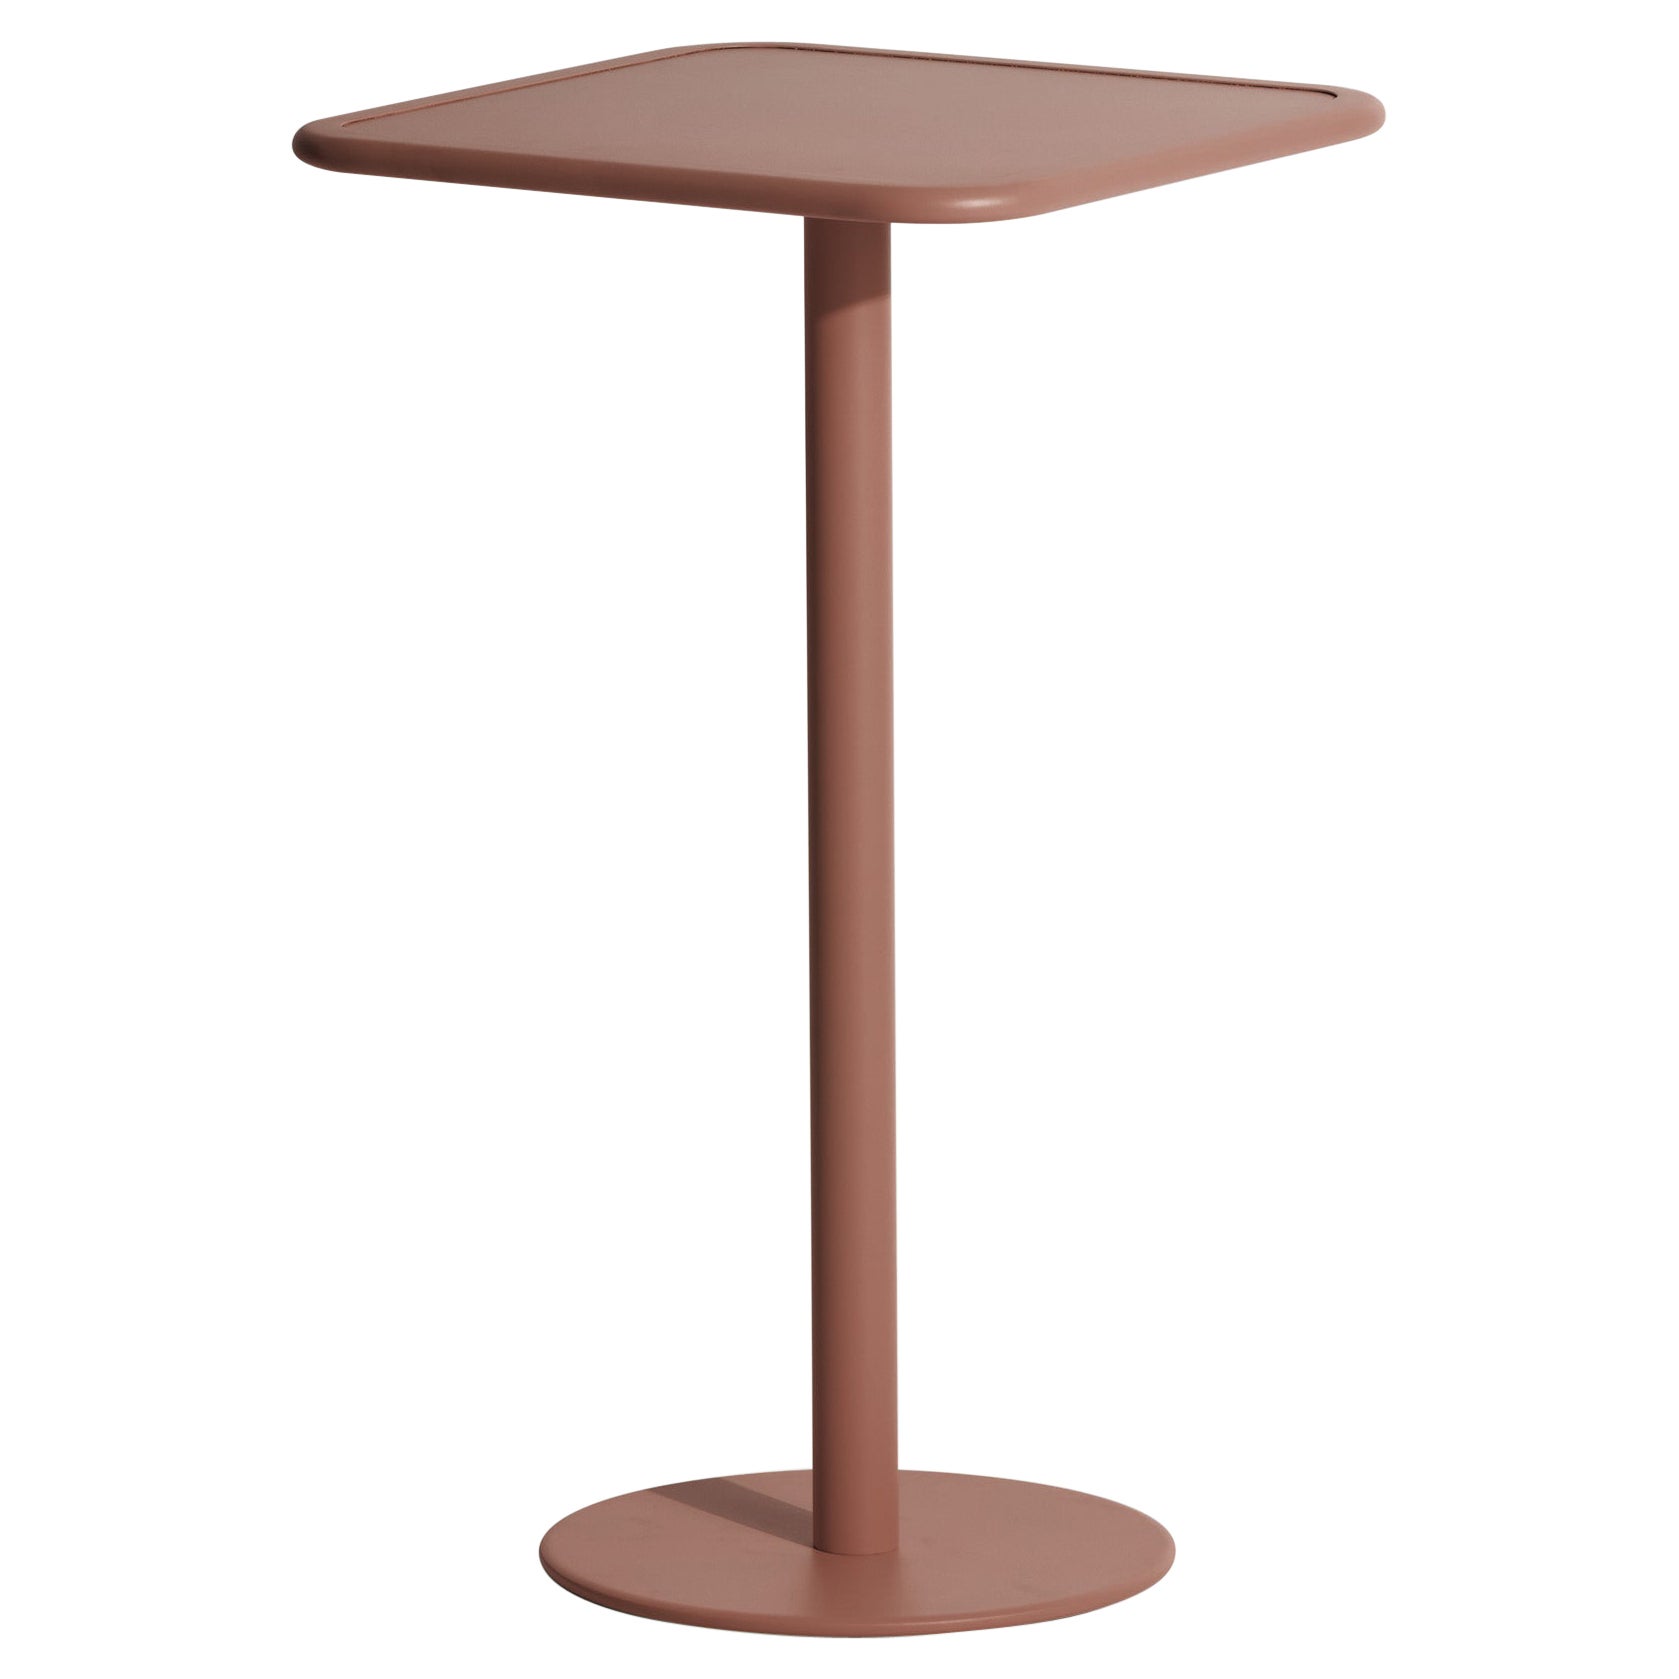 Petite Friture Week-End Square High Table in Terracotta Aluminium, 2017 For Sale